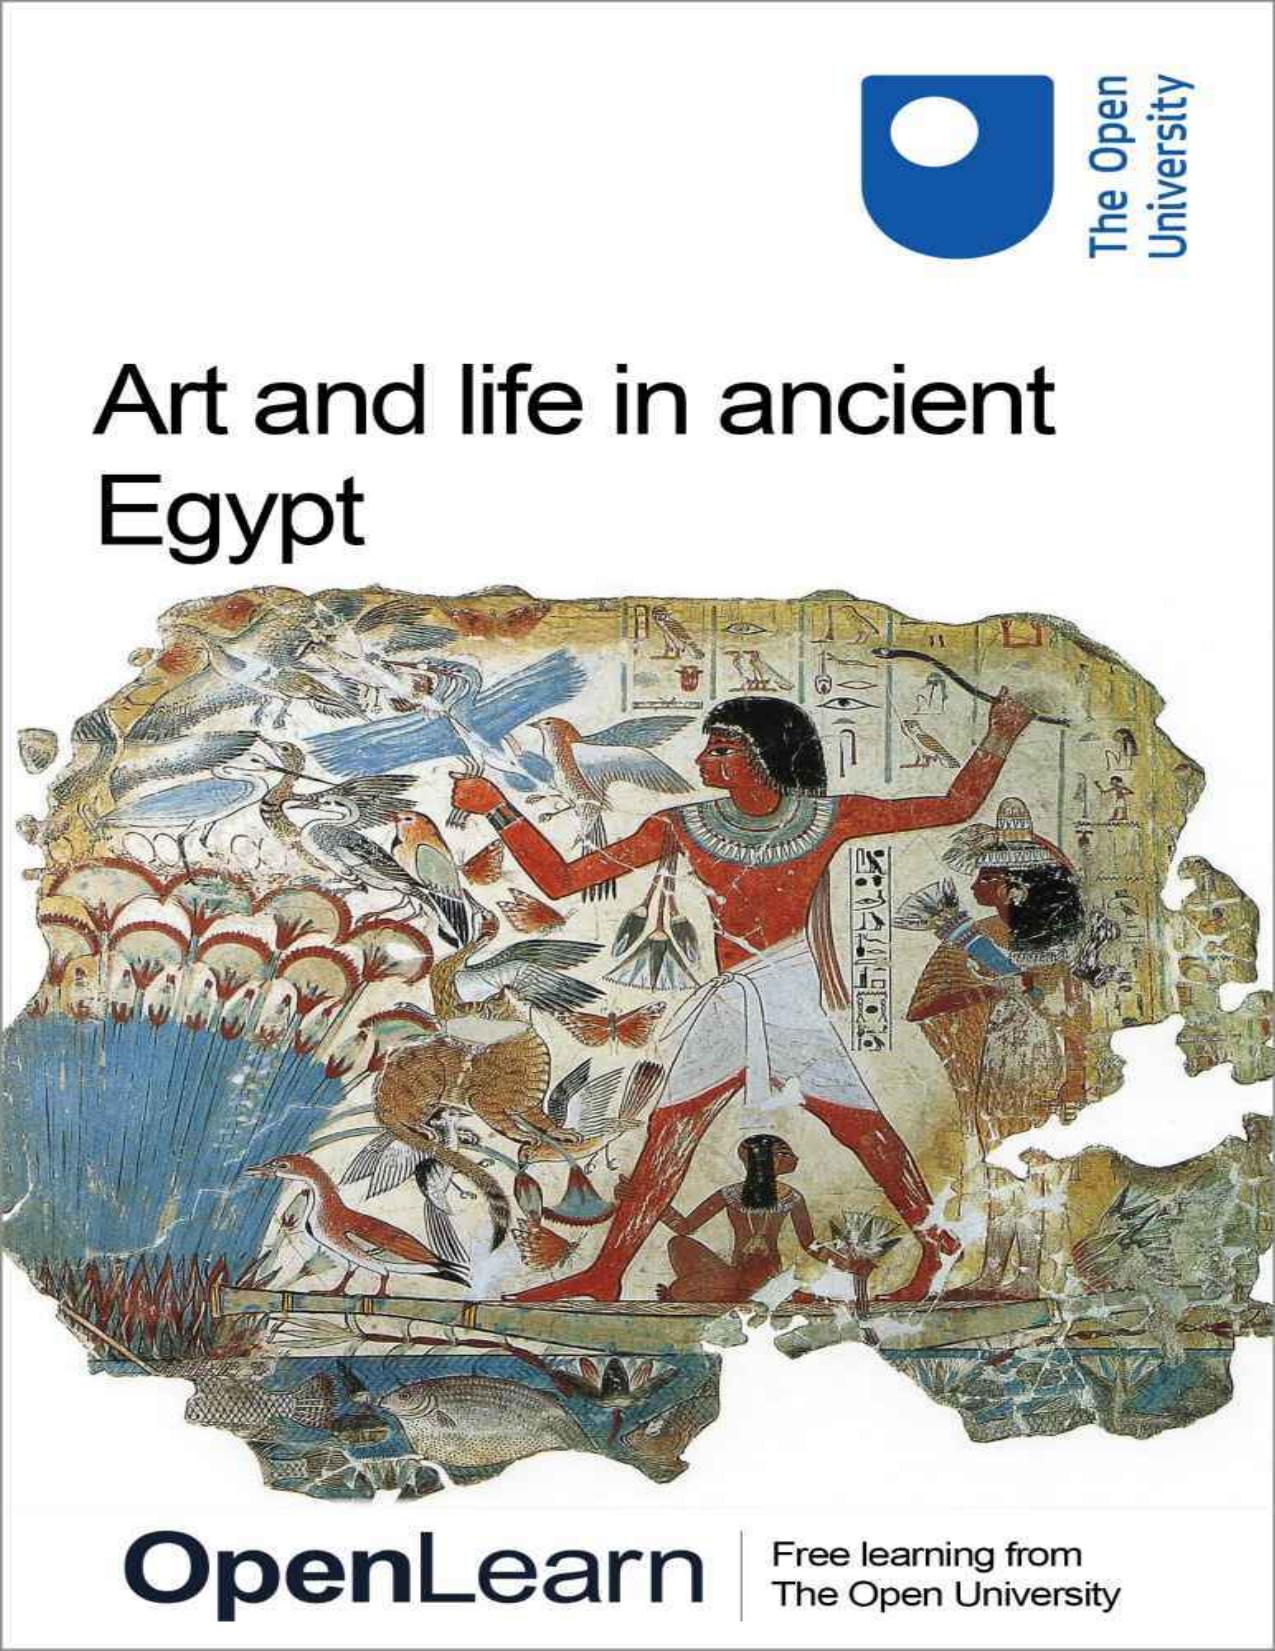 Art and life in ancient Egypt by The Open University